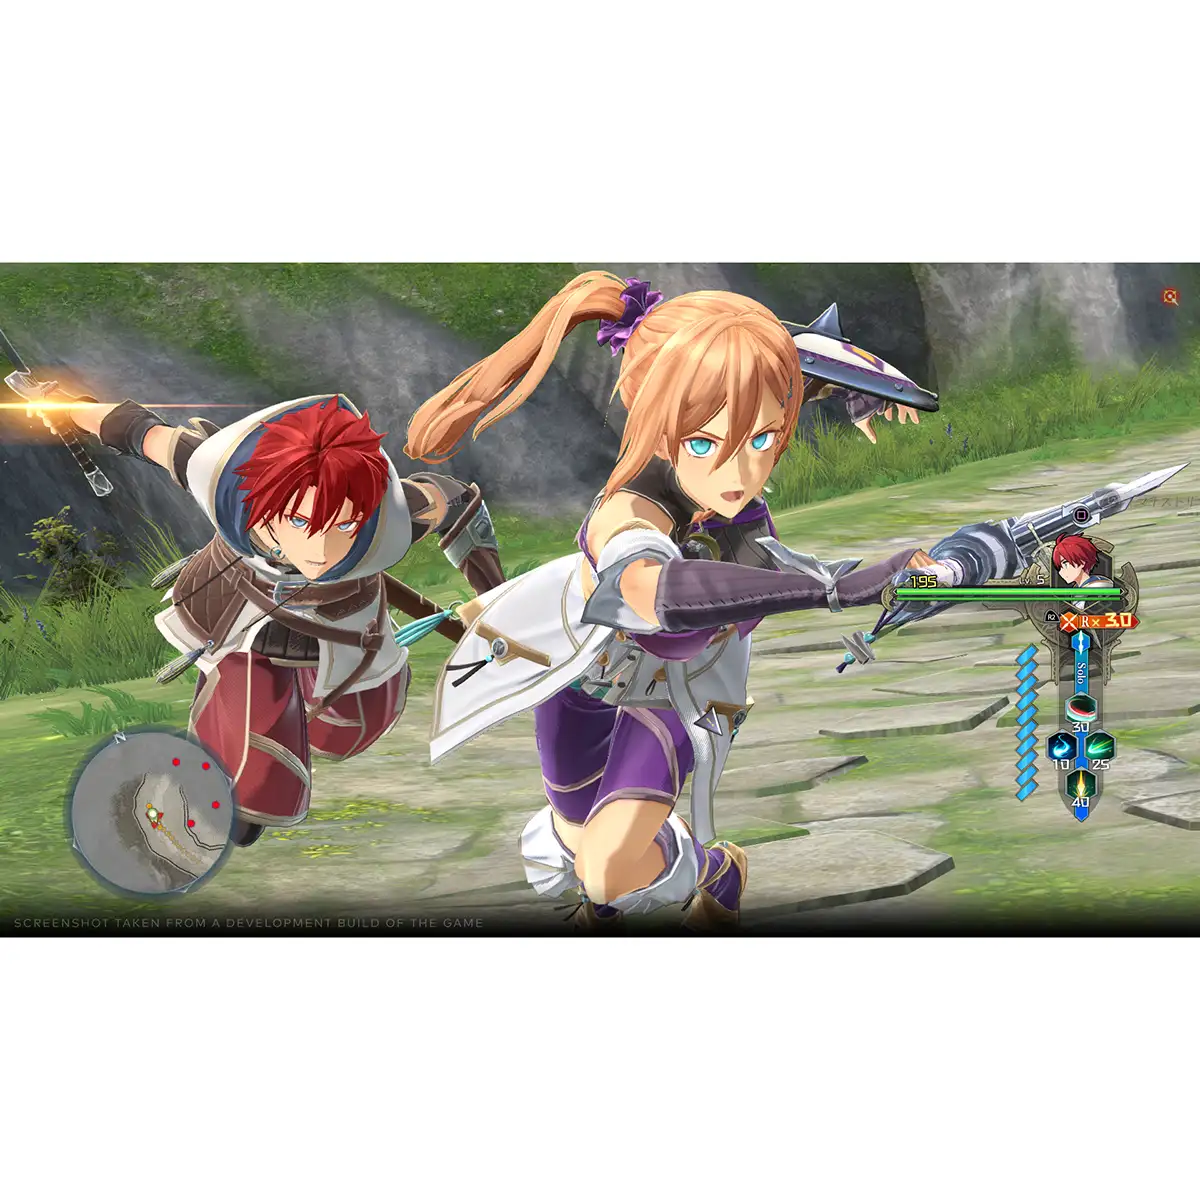 Ys X: Nordics - Deluxe Edition (Switch) Image 9